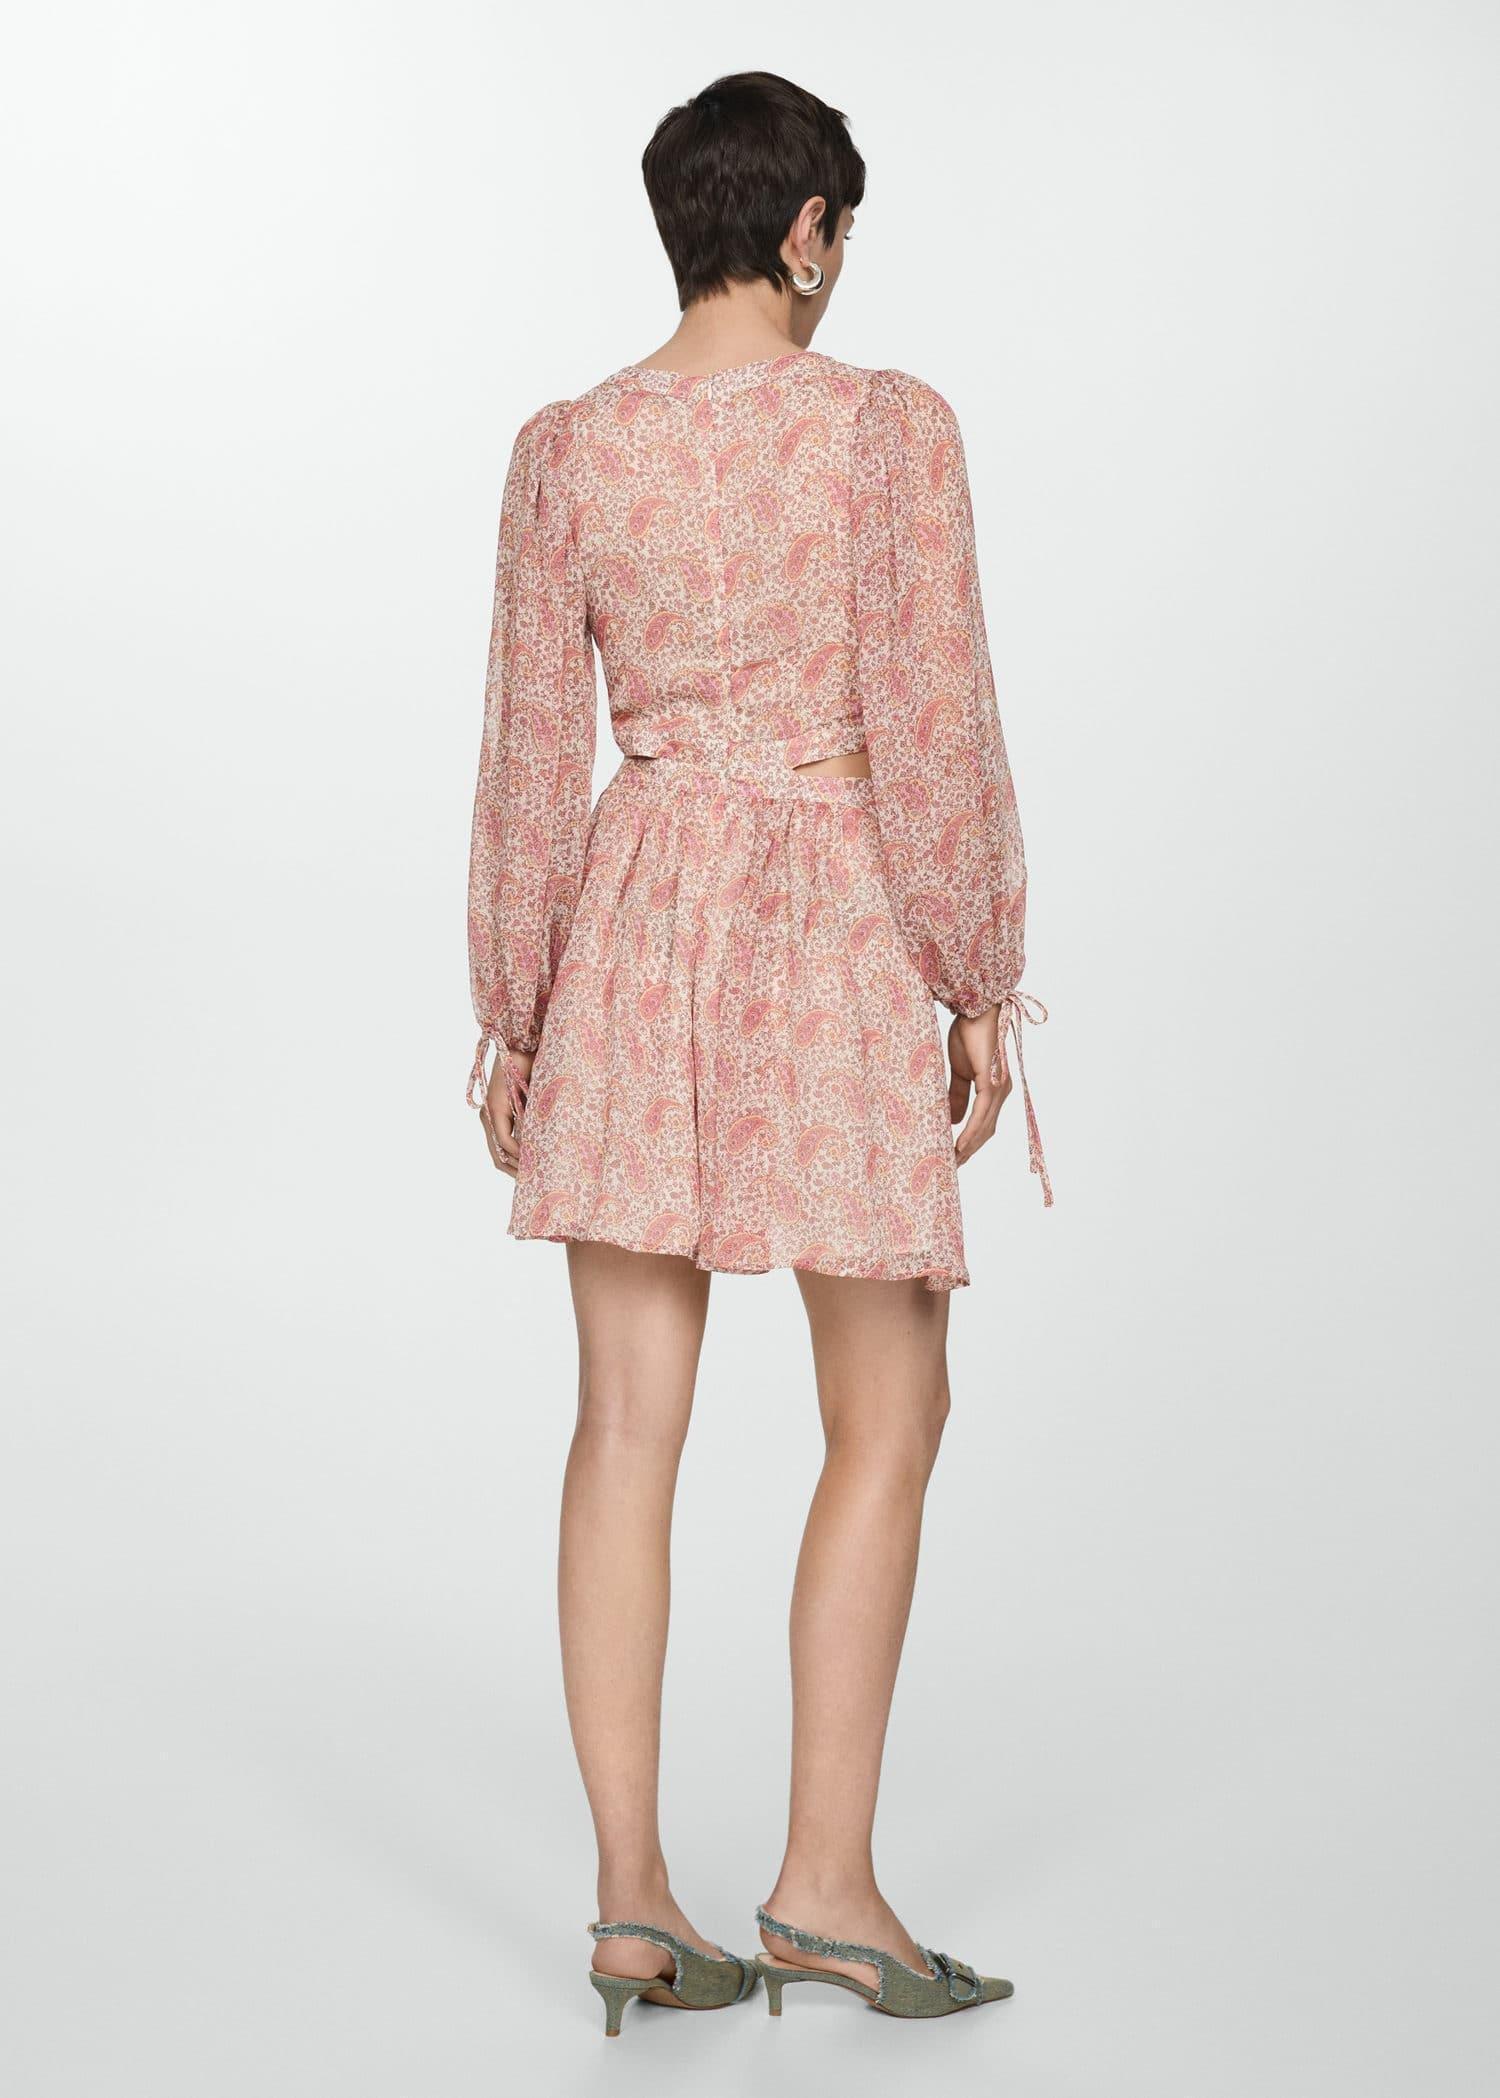 Mango - Pink Lt-Pastel Paisley Dress With Openings